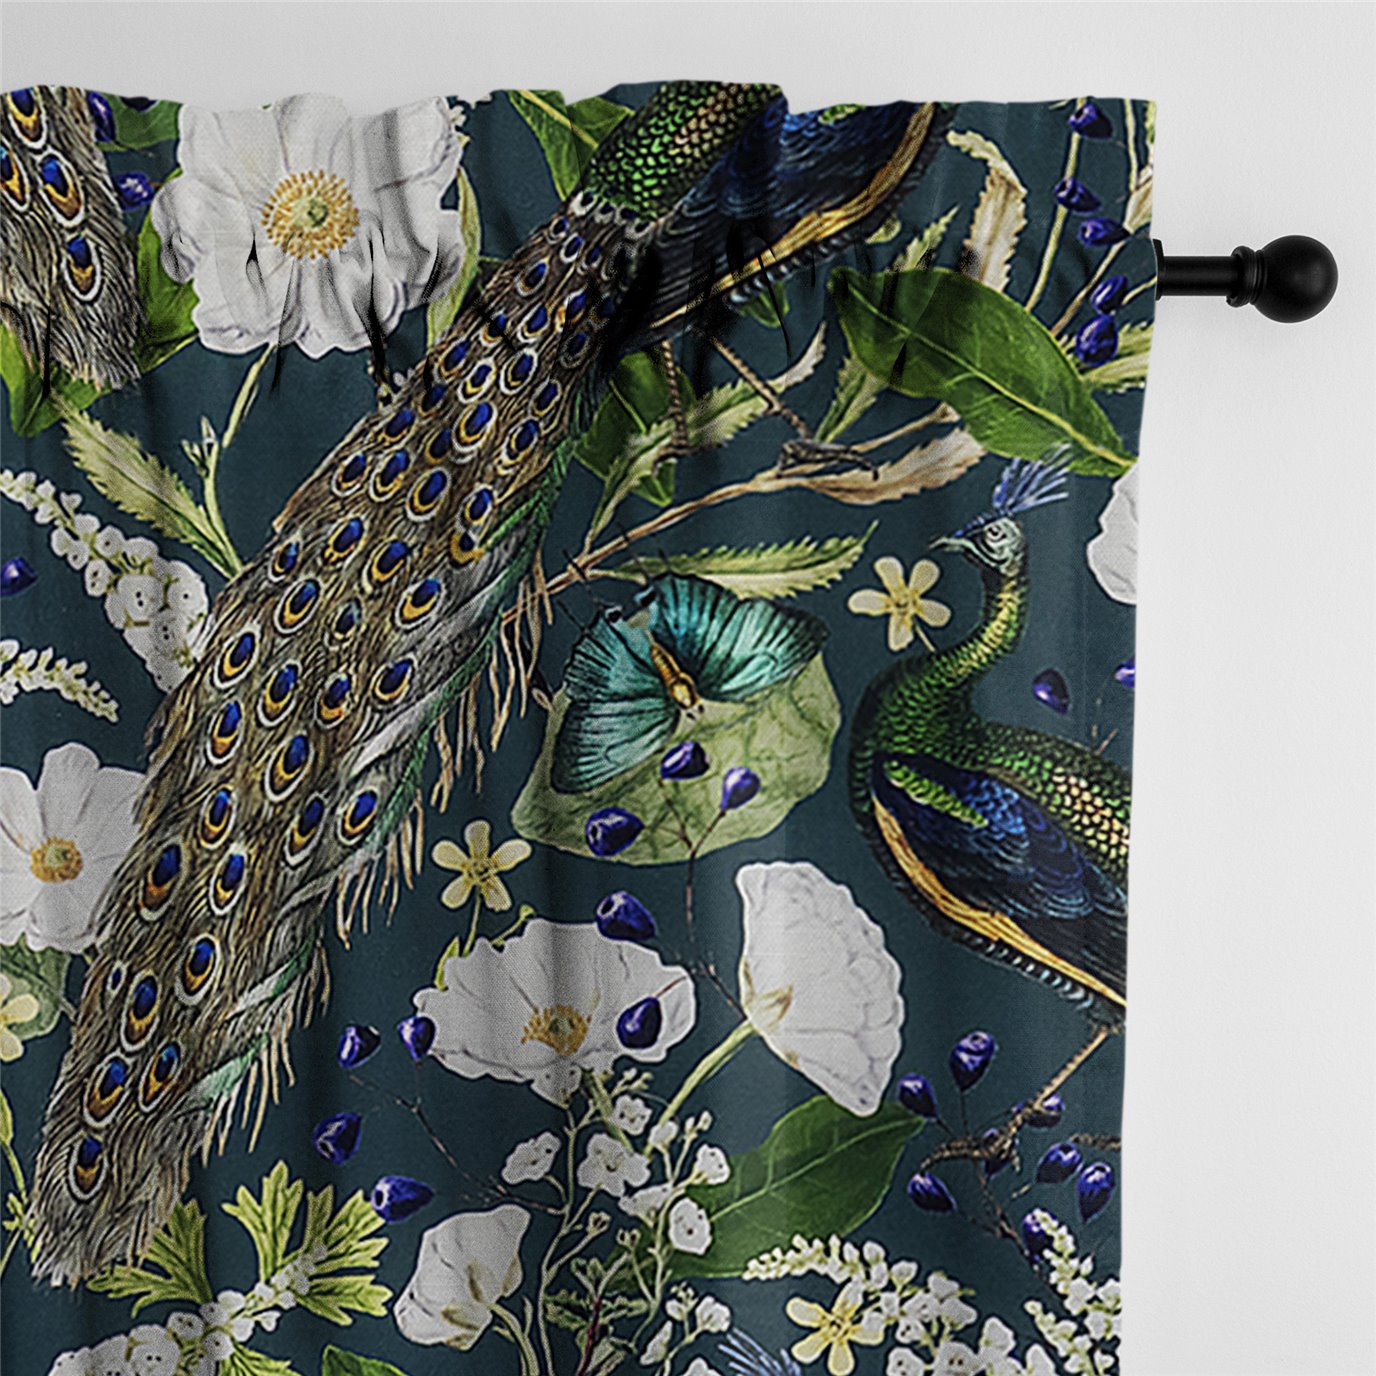 Peacock Print Teal/Navy Pole Top Drapery Panel - Pair - Size 50"x84"